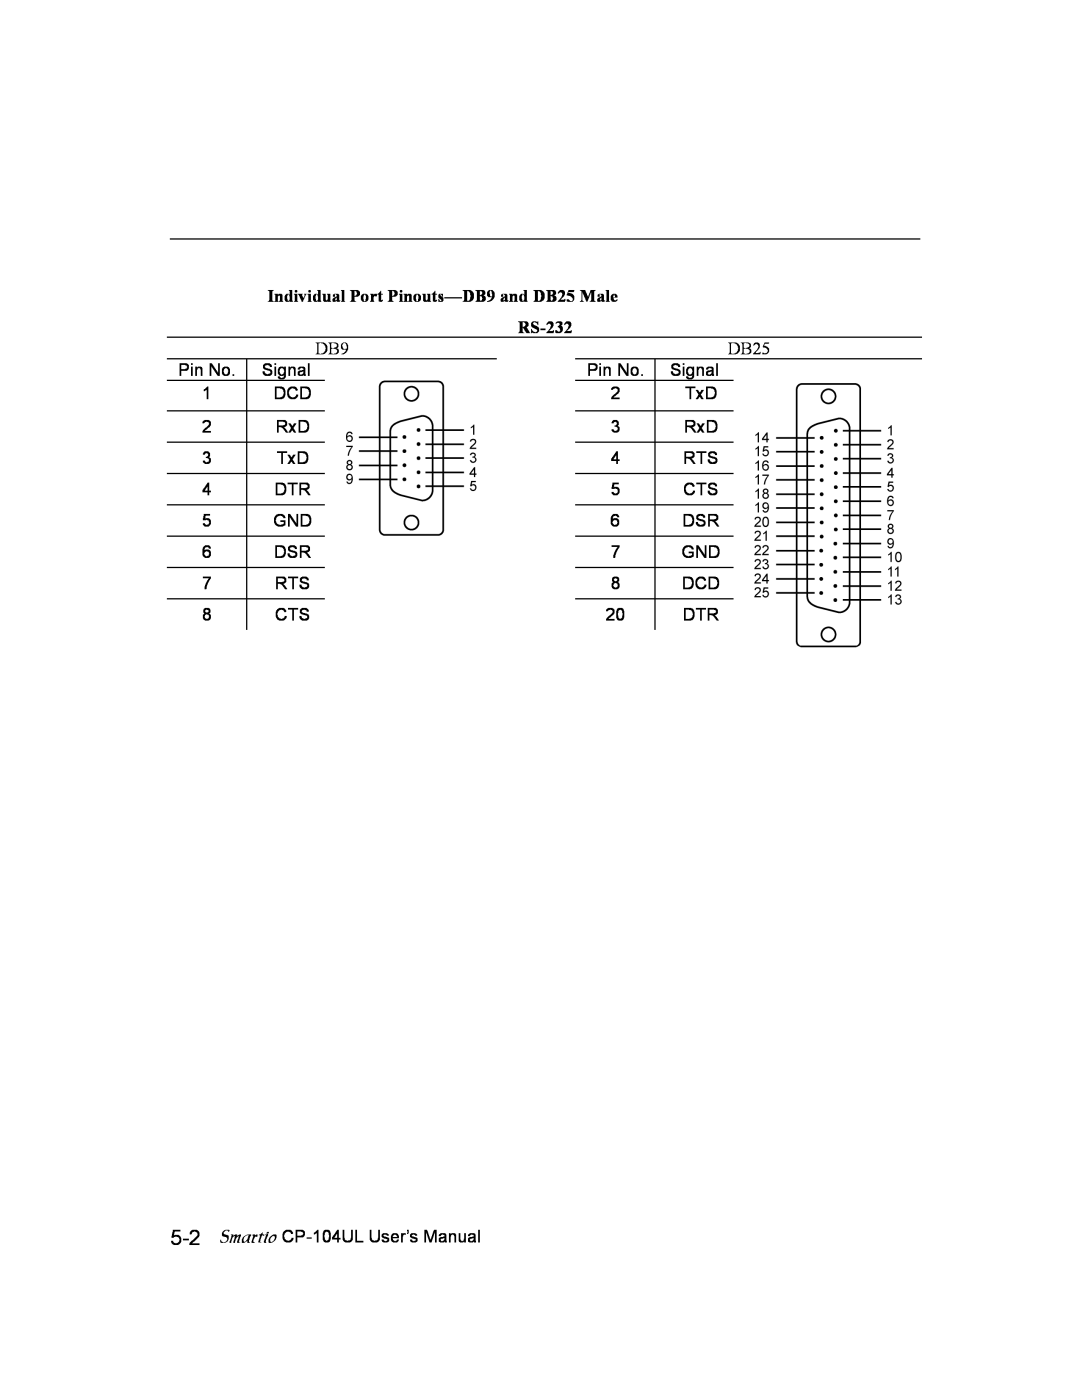 Moxa Technologies CP-104UL user manual Individual Port Pinouts-DB9 and DB25 Male RS-232 